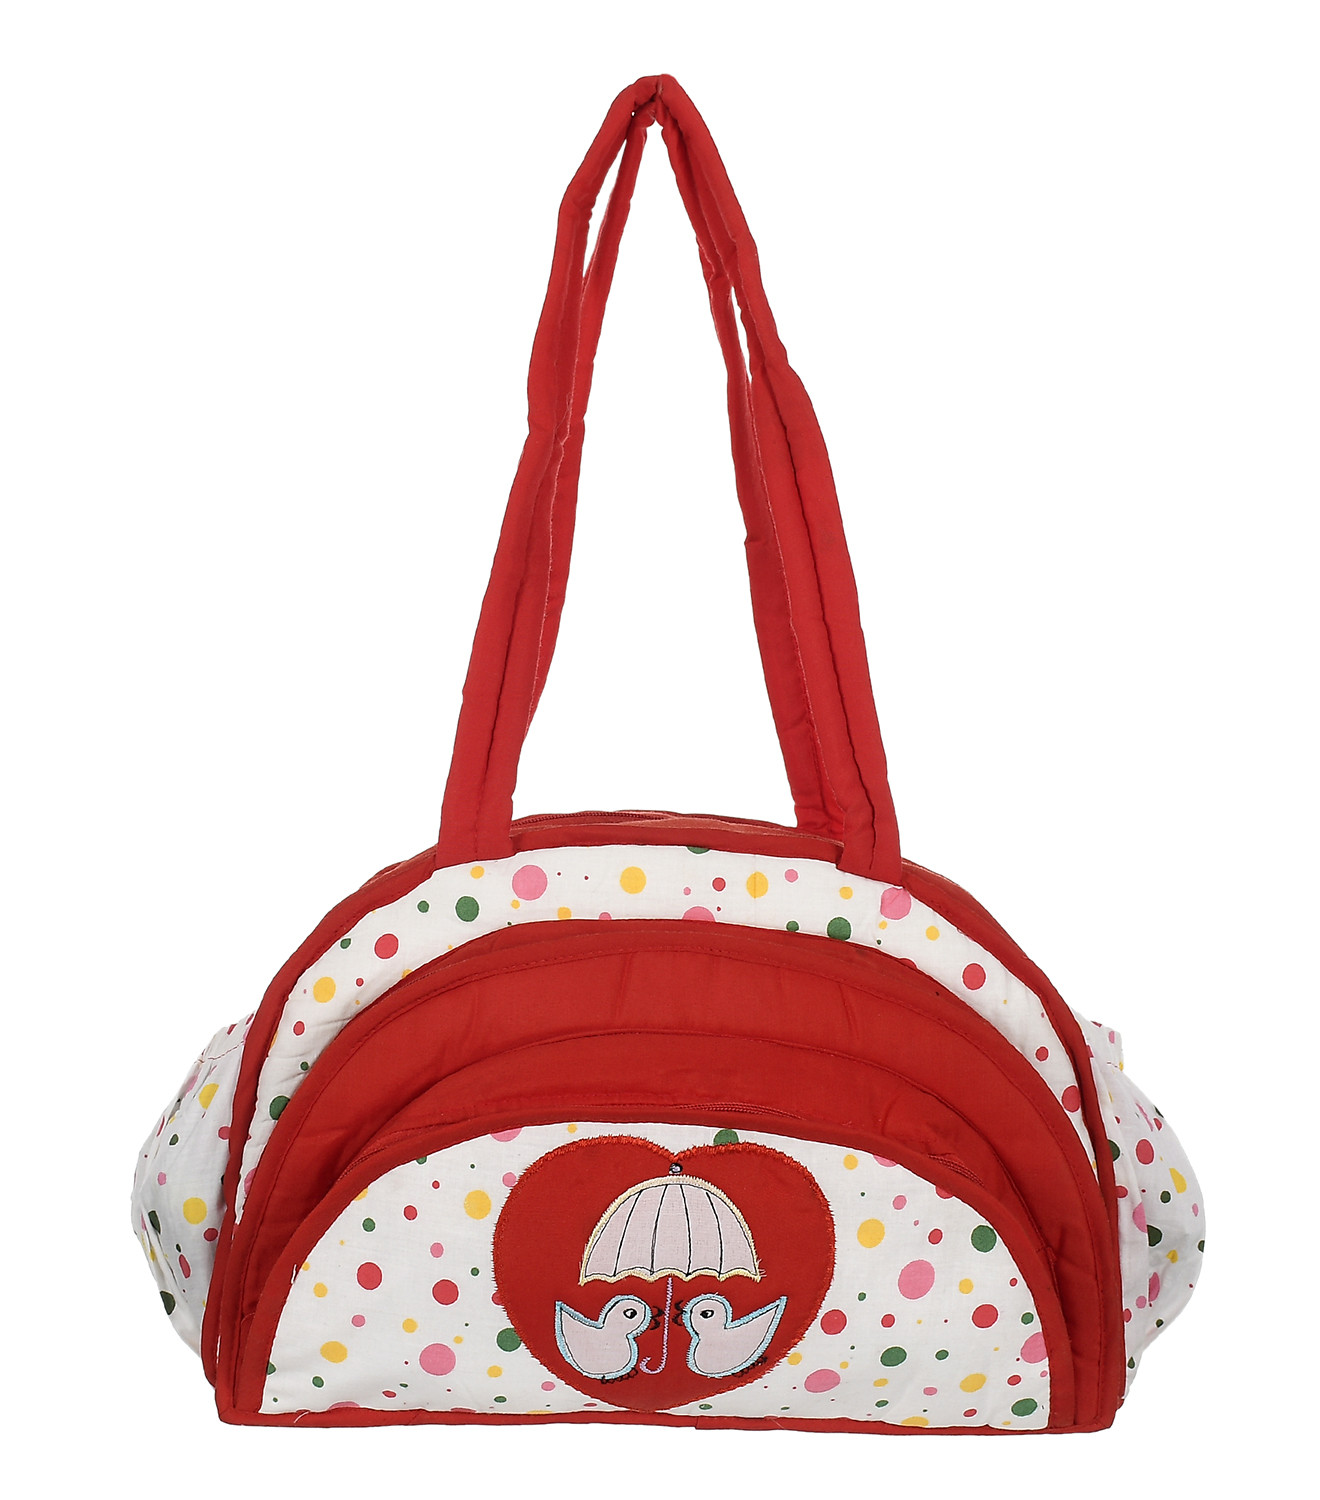 Kuber Industries Cotton Multiuses Dot Print Mothers Bag/Diapers Bags With Handle For Traveling & Storing (Red & White)